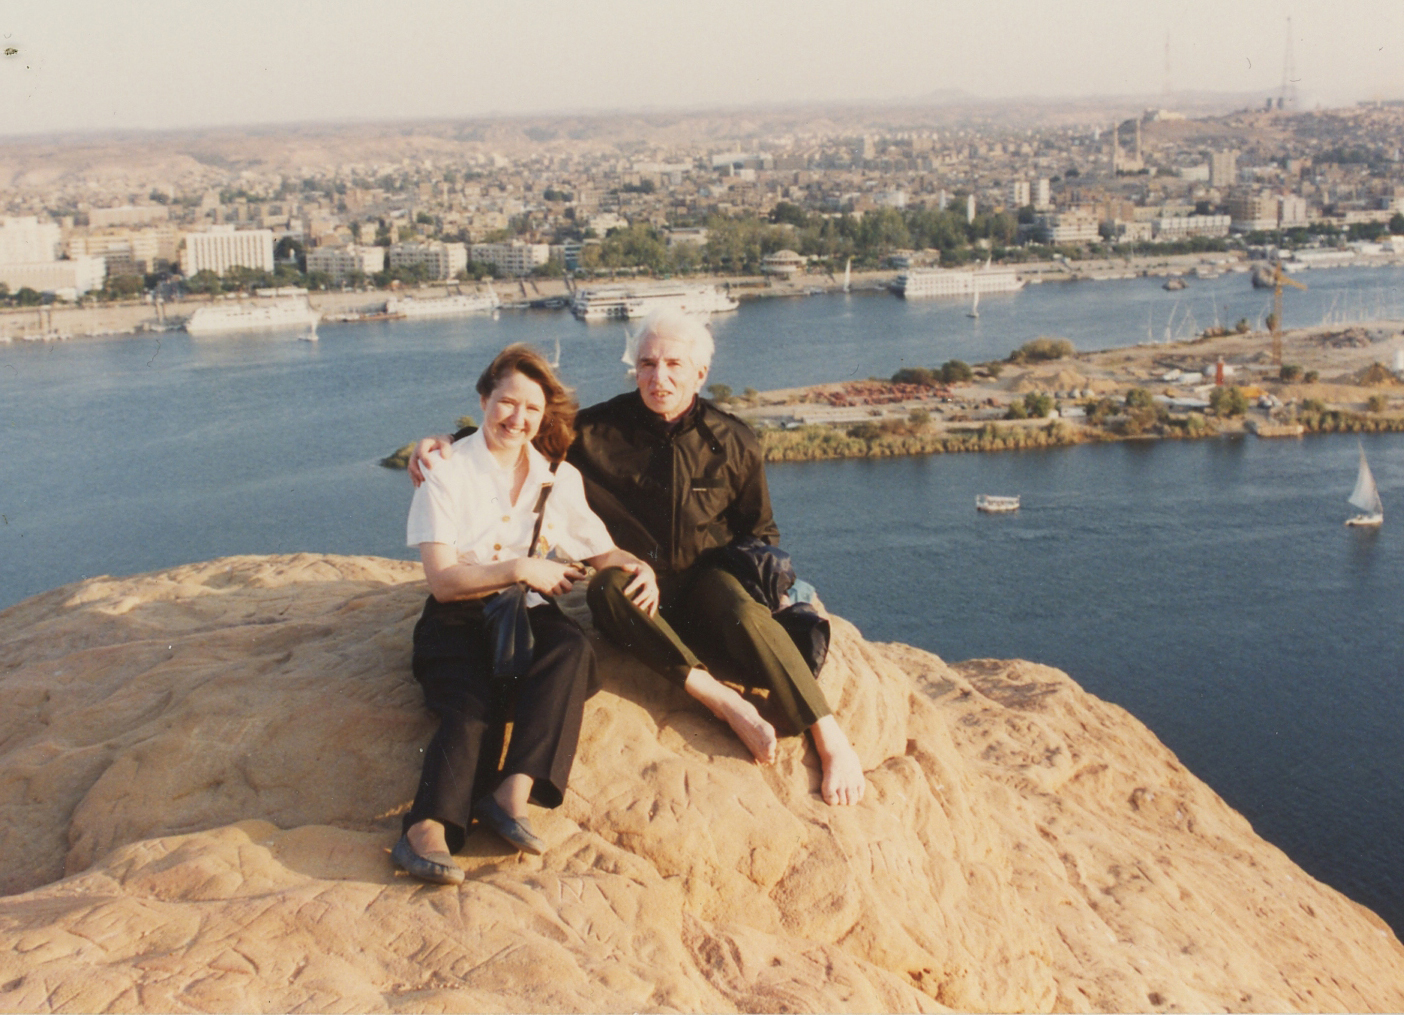 Ann James Massey & Henri Bérenger on another trip to Egypt in Aswan next to Qubbet el-Hawa, the tombs of the nobles, in 1995